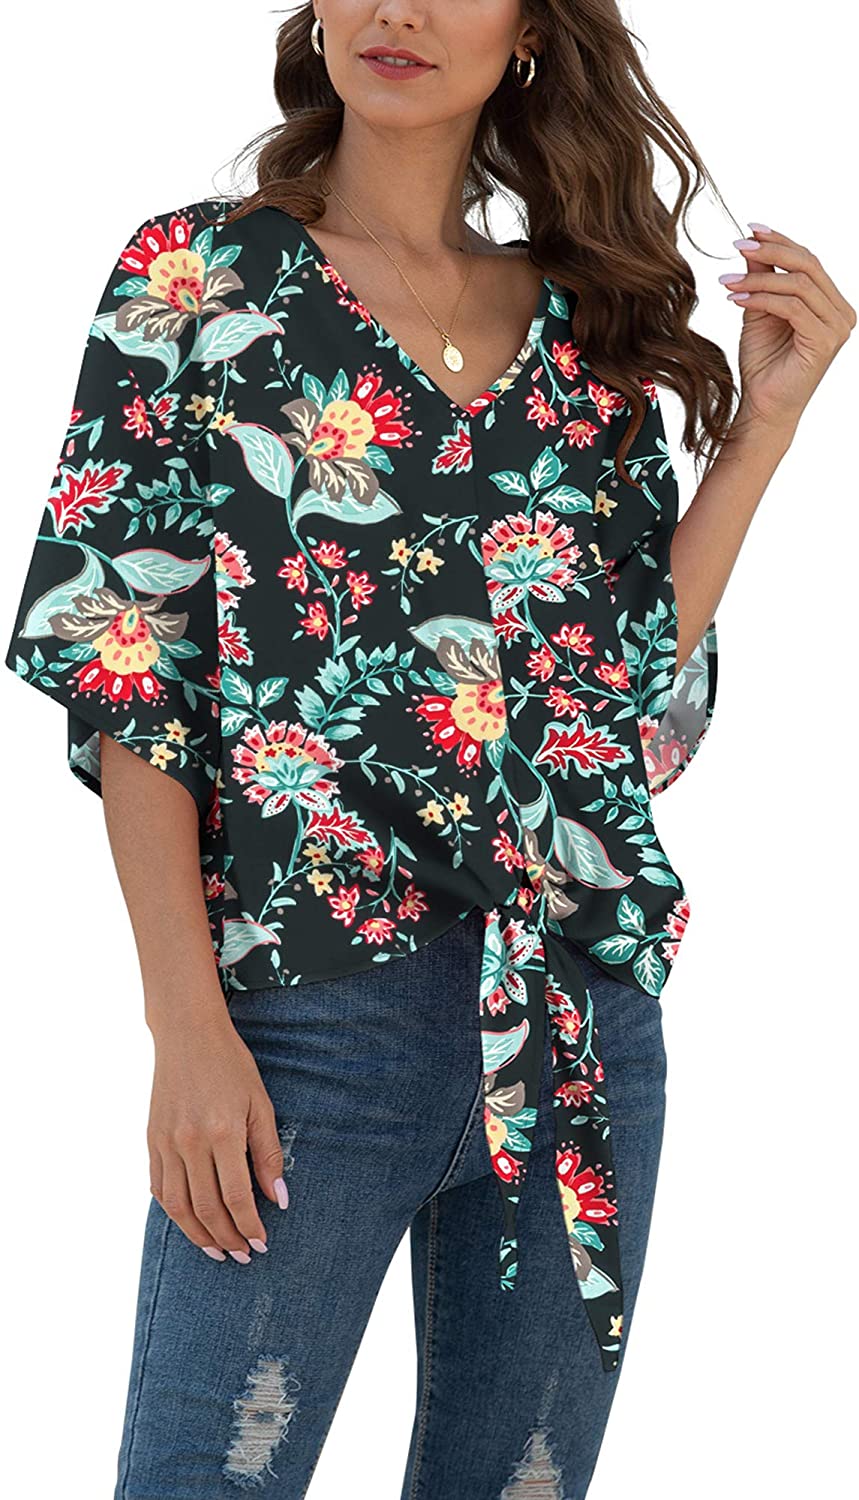 VIISHOW Womens Short Sleeve V Neck Floral Tie Front Chiffon Blouses Batwing Summer Tops Shirts 